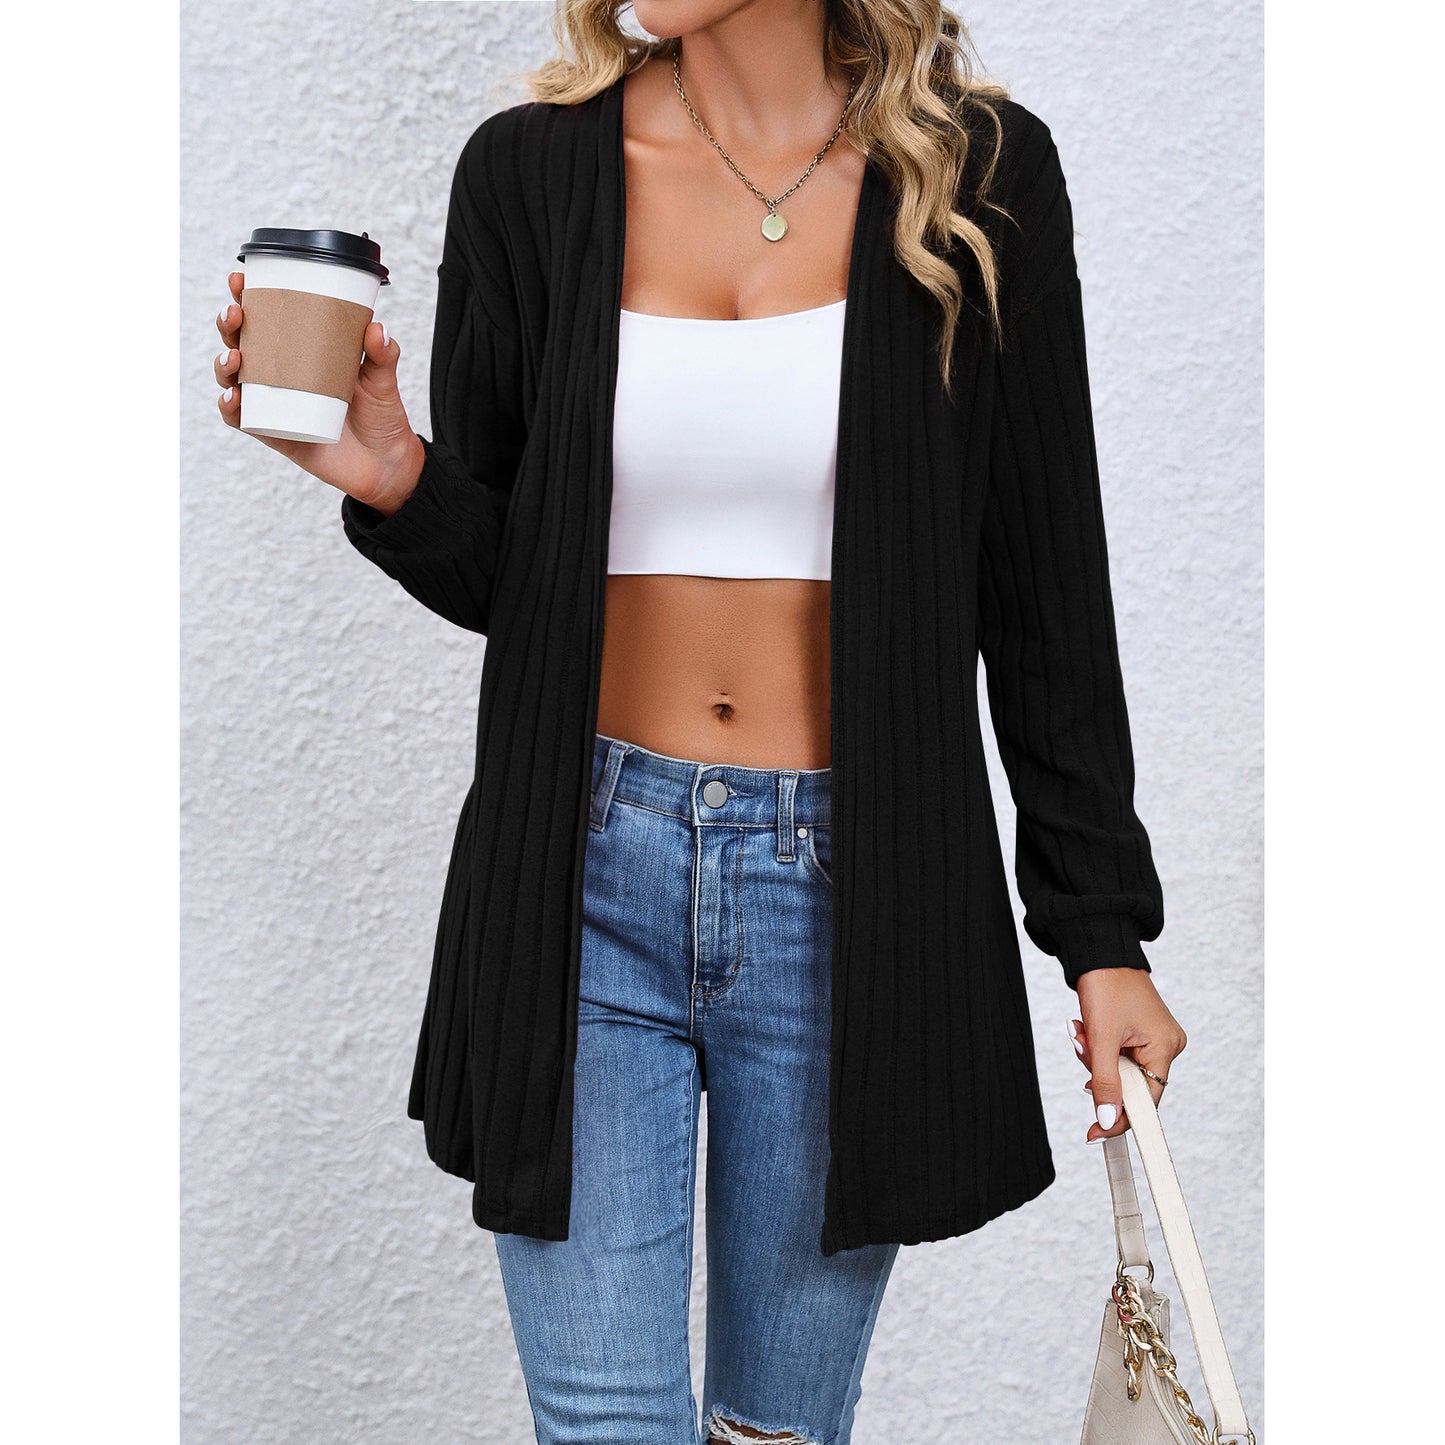 Women's Fashion Loose Casual Style Cardigan Cape Top